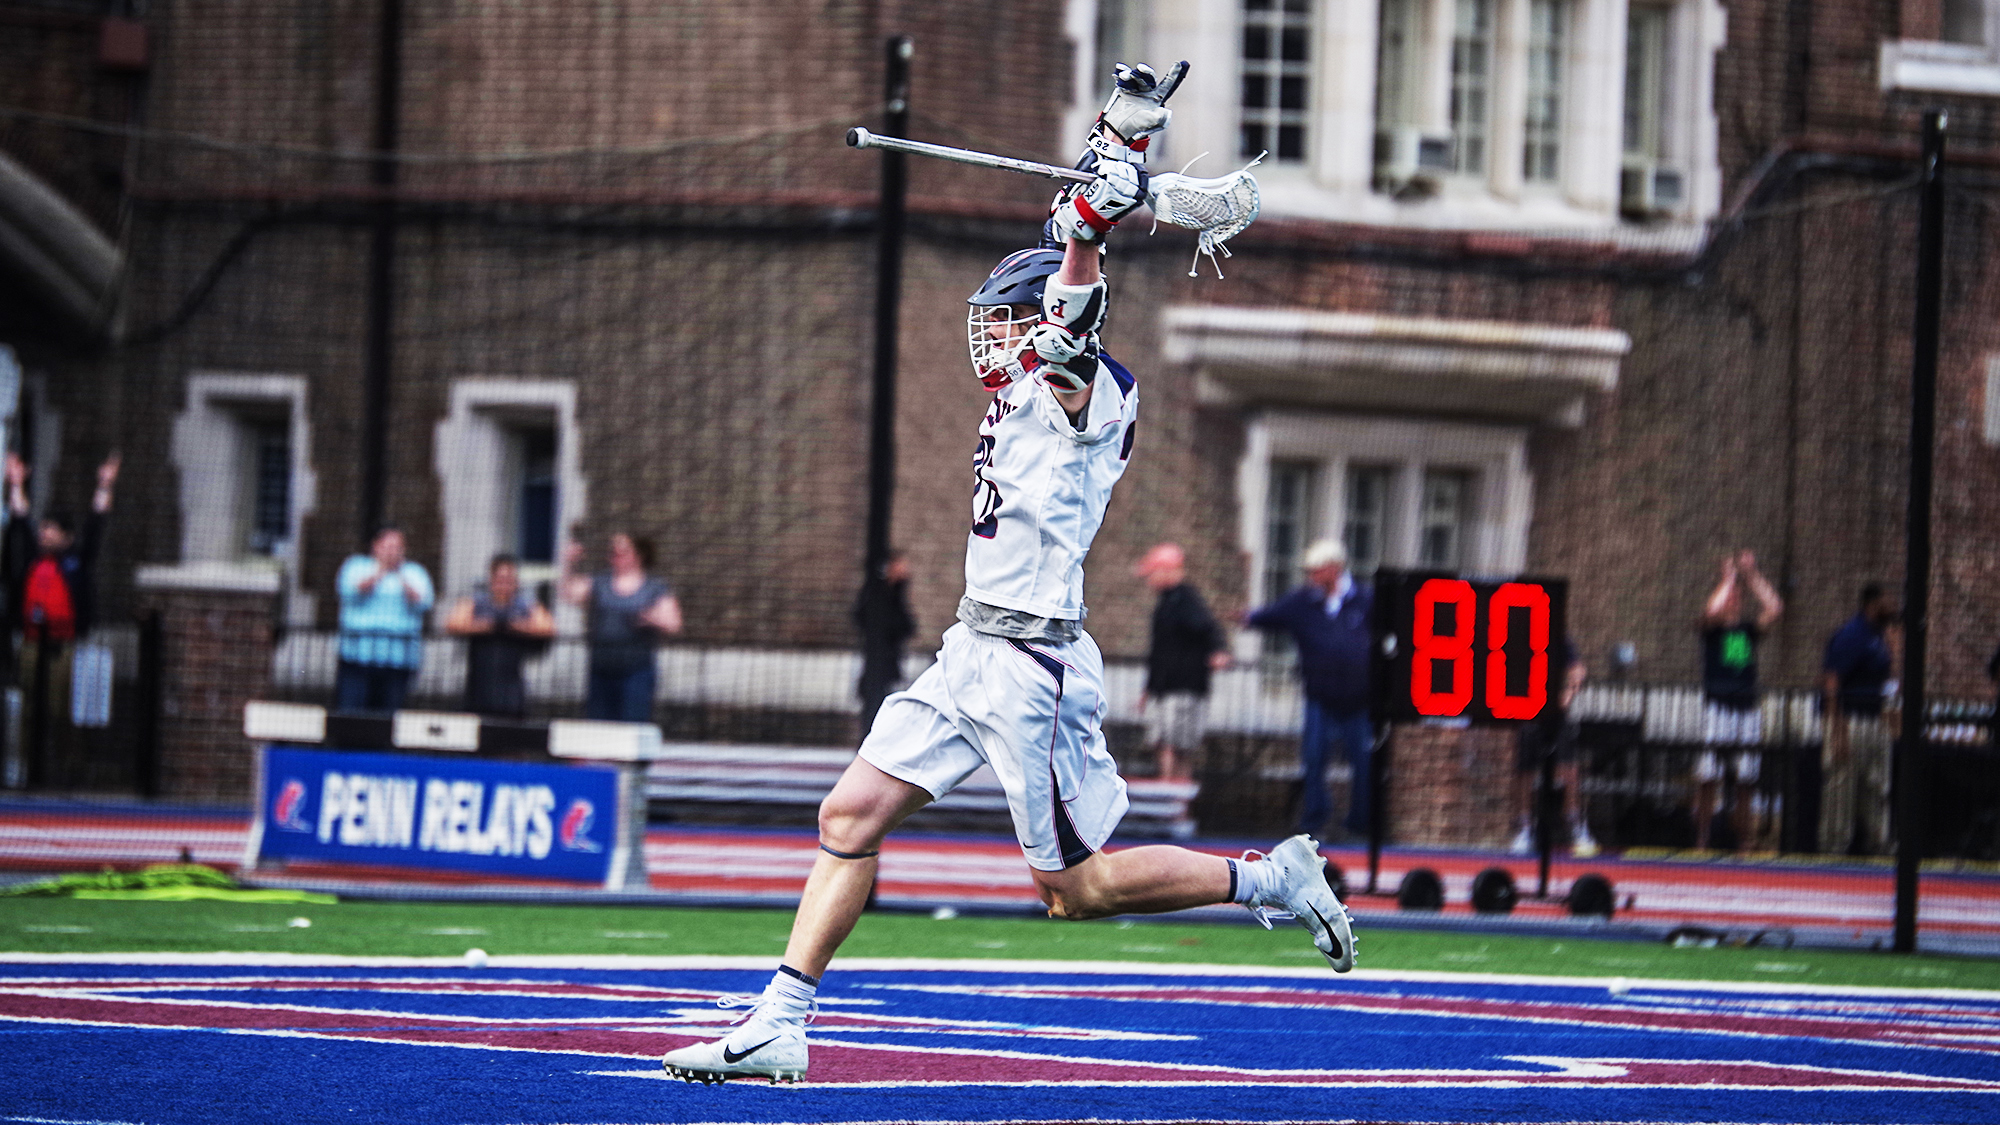 Freshman attacker Sam Handley celebrates after scoring the game-winning goal against Yale at Franklin Field.